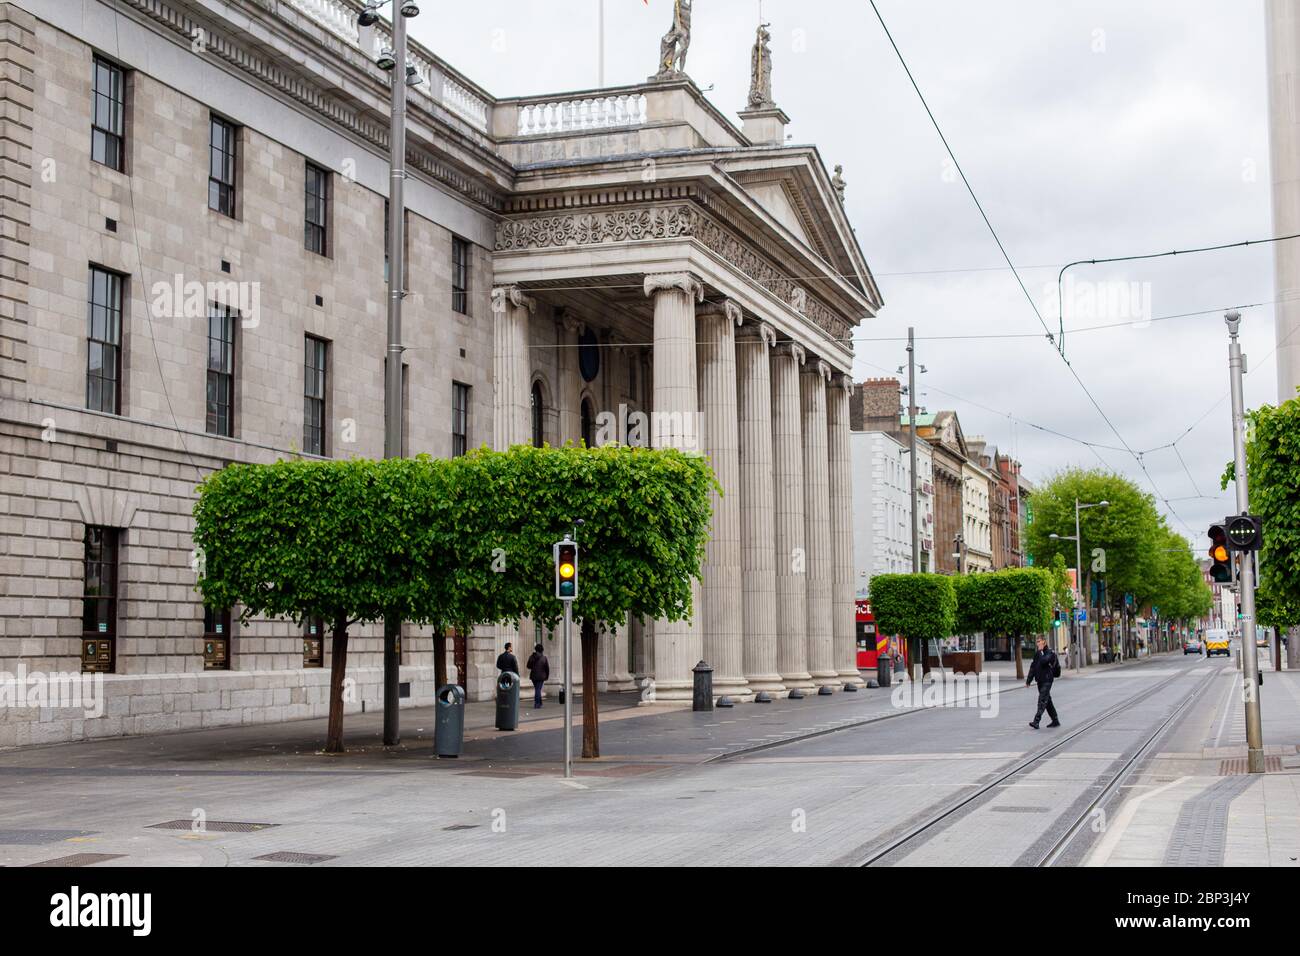 Dublin, Ireland. May 2020. Limited footfall and traffic on O`Connell St in Dublin as shops and businesses closed due to Covid-19 pandemic restrictions Stock Photo